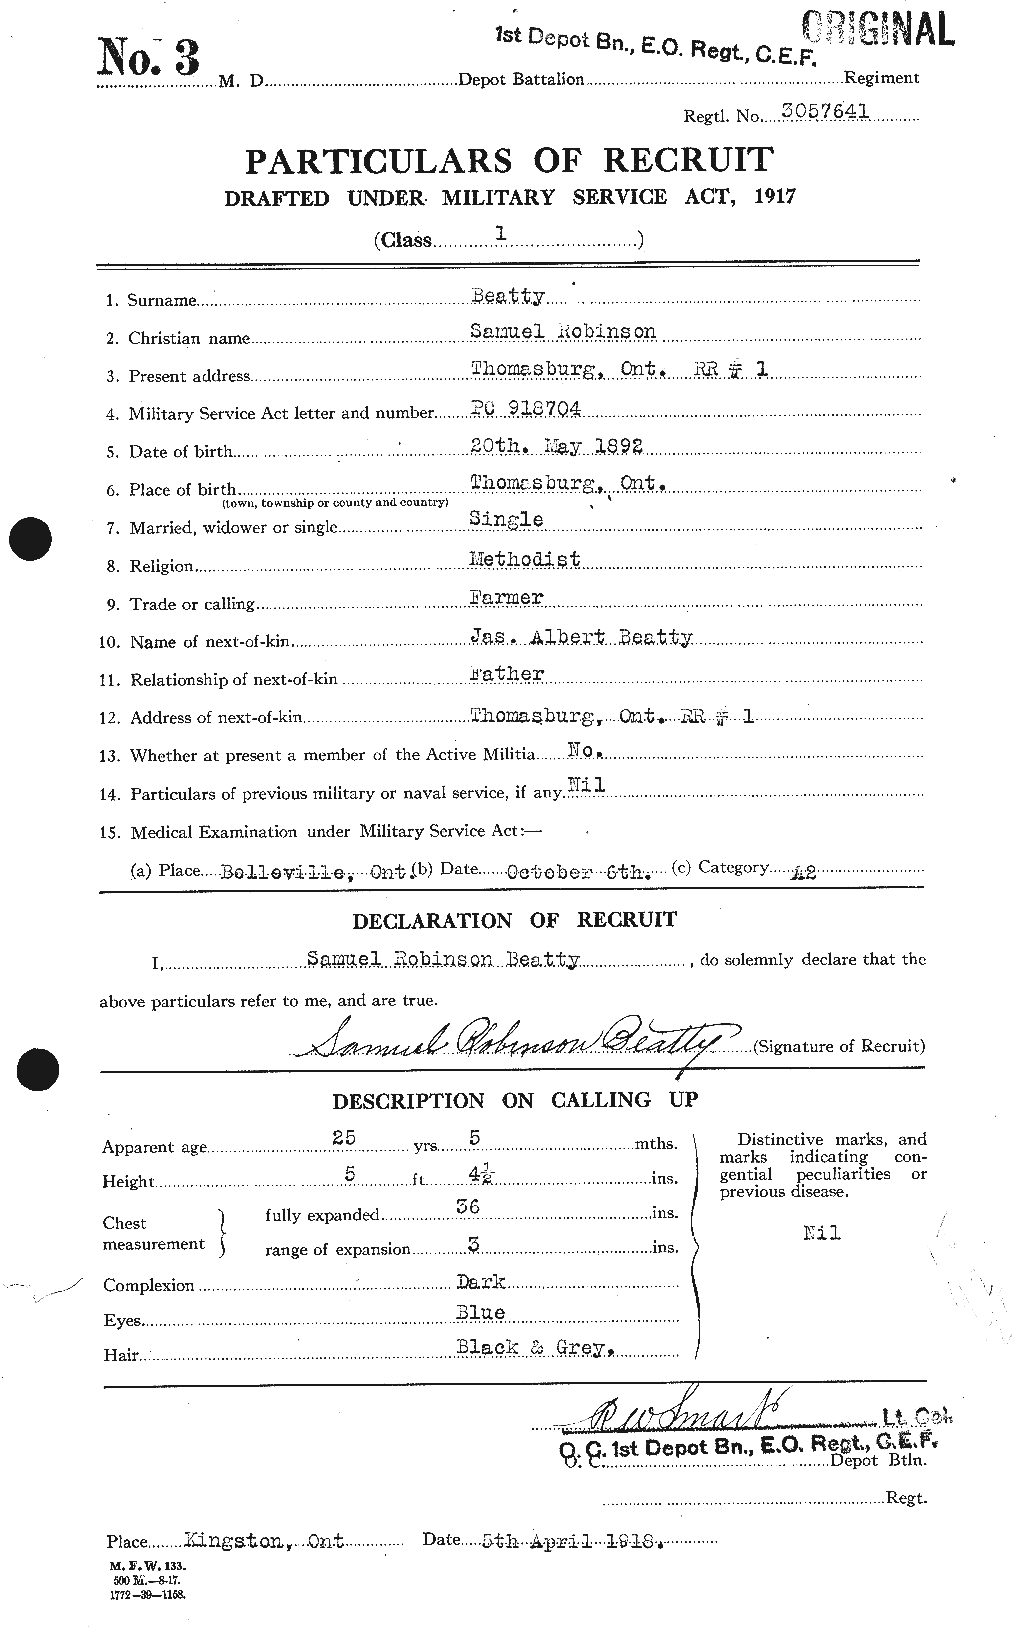 Personnel Records of the First World War - CEF 236437a